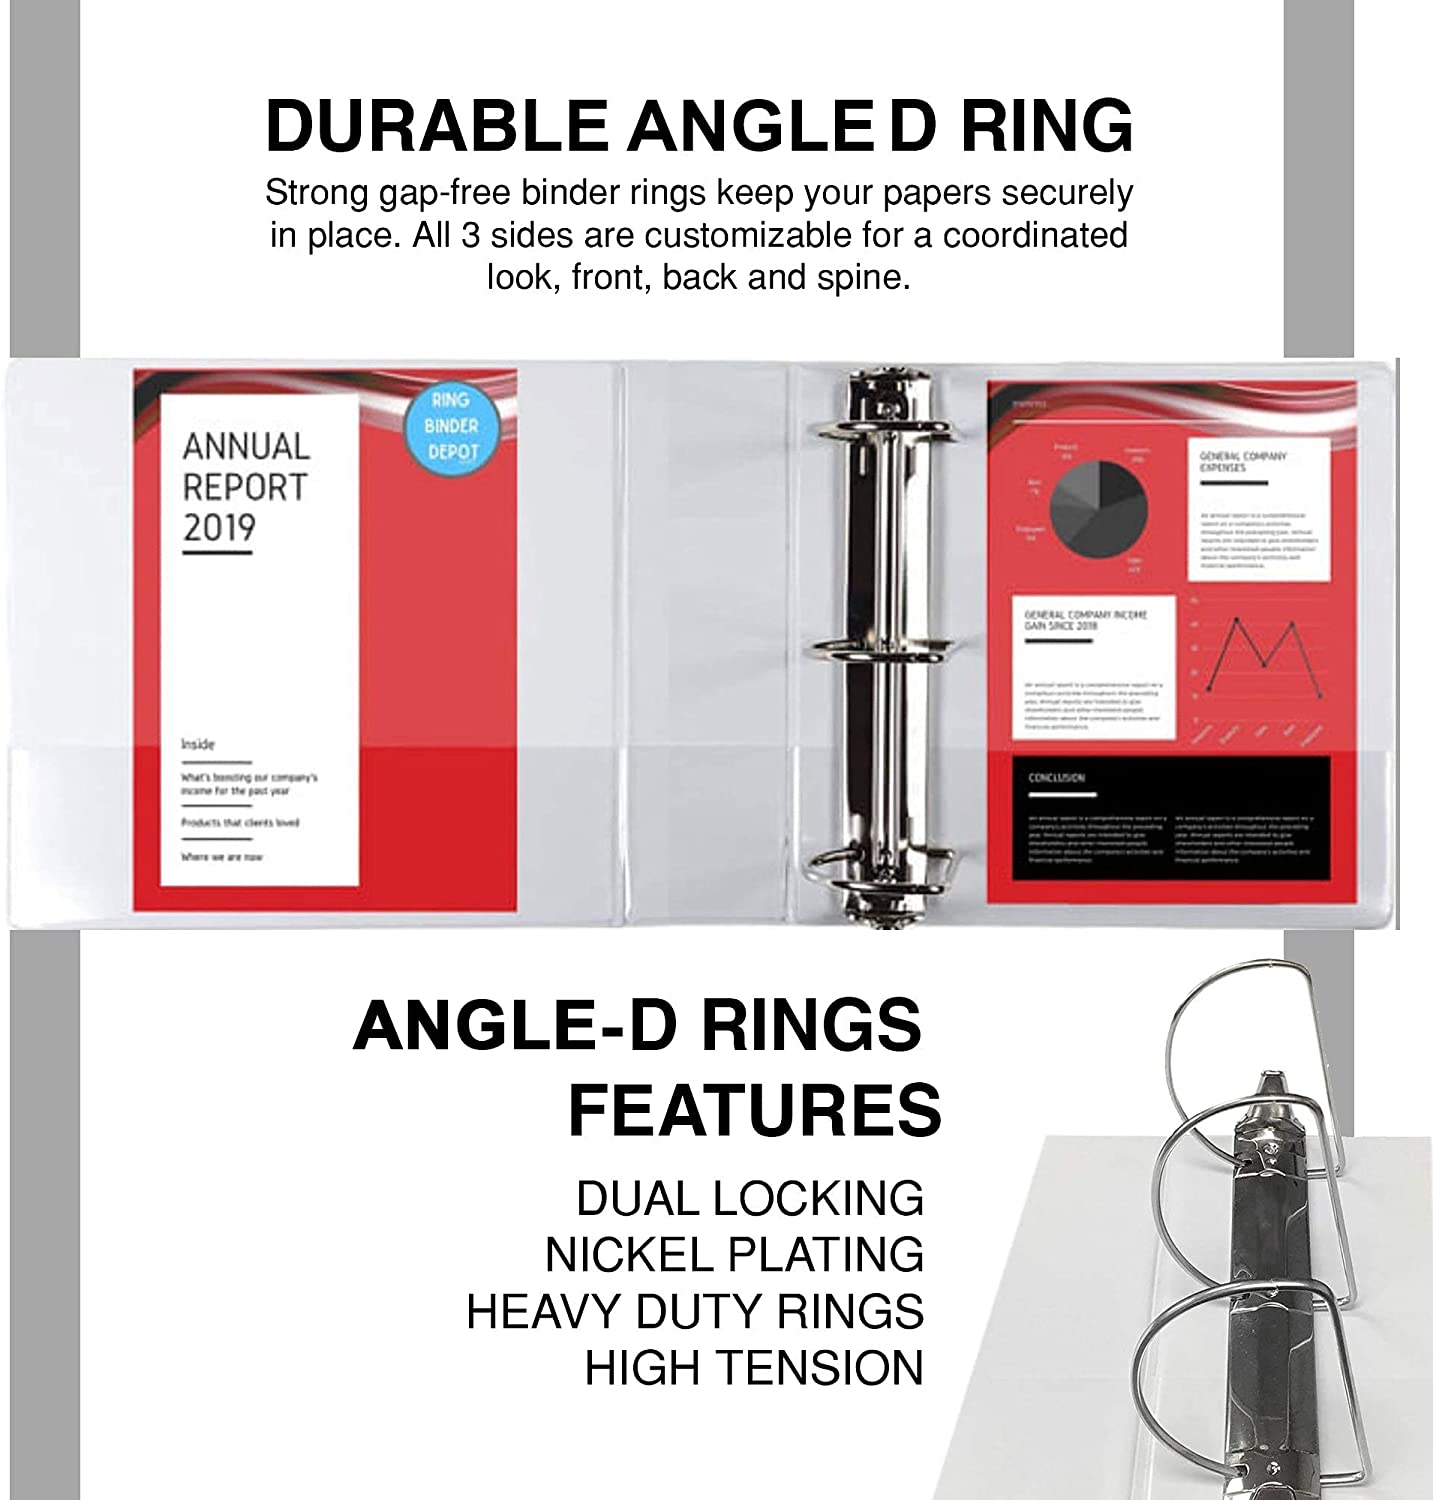 3 Ring Binder, 2.5 Inch Angle D-Rings, White, Clear View, Pockets - 2 Pack